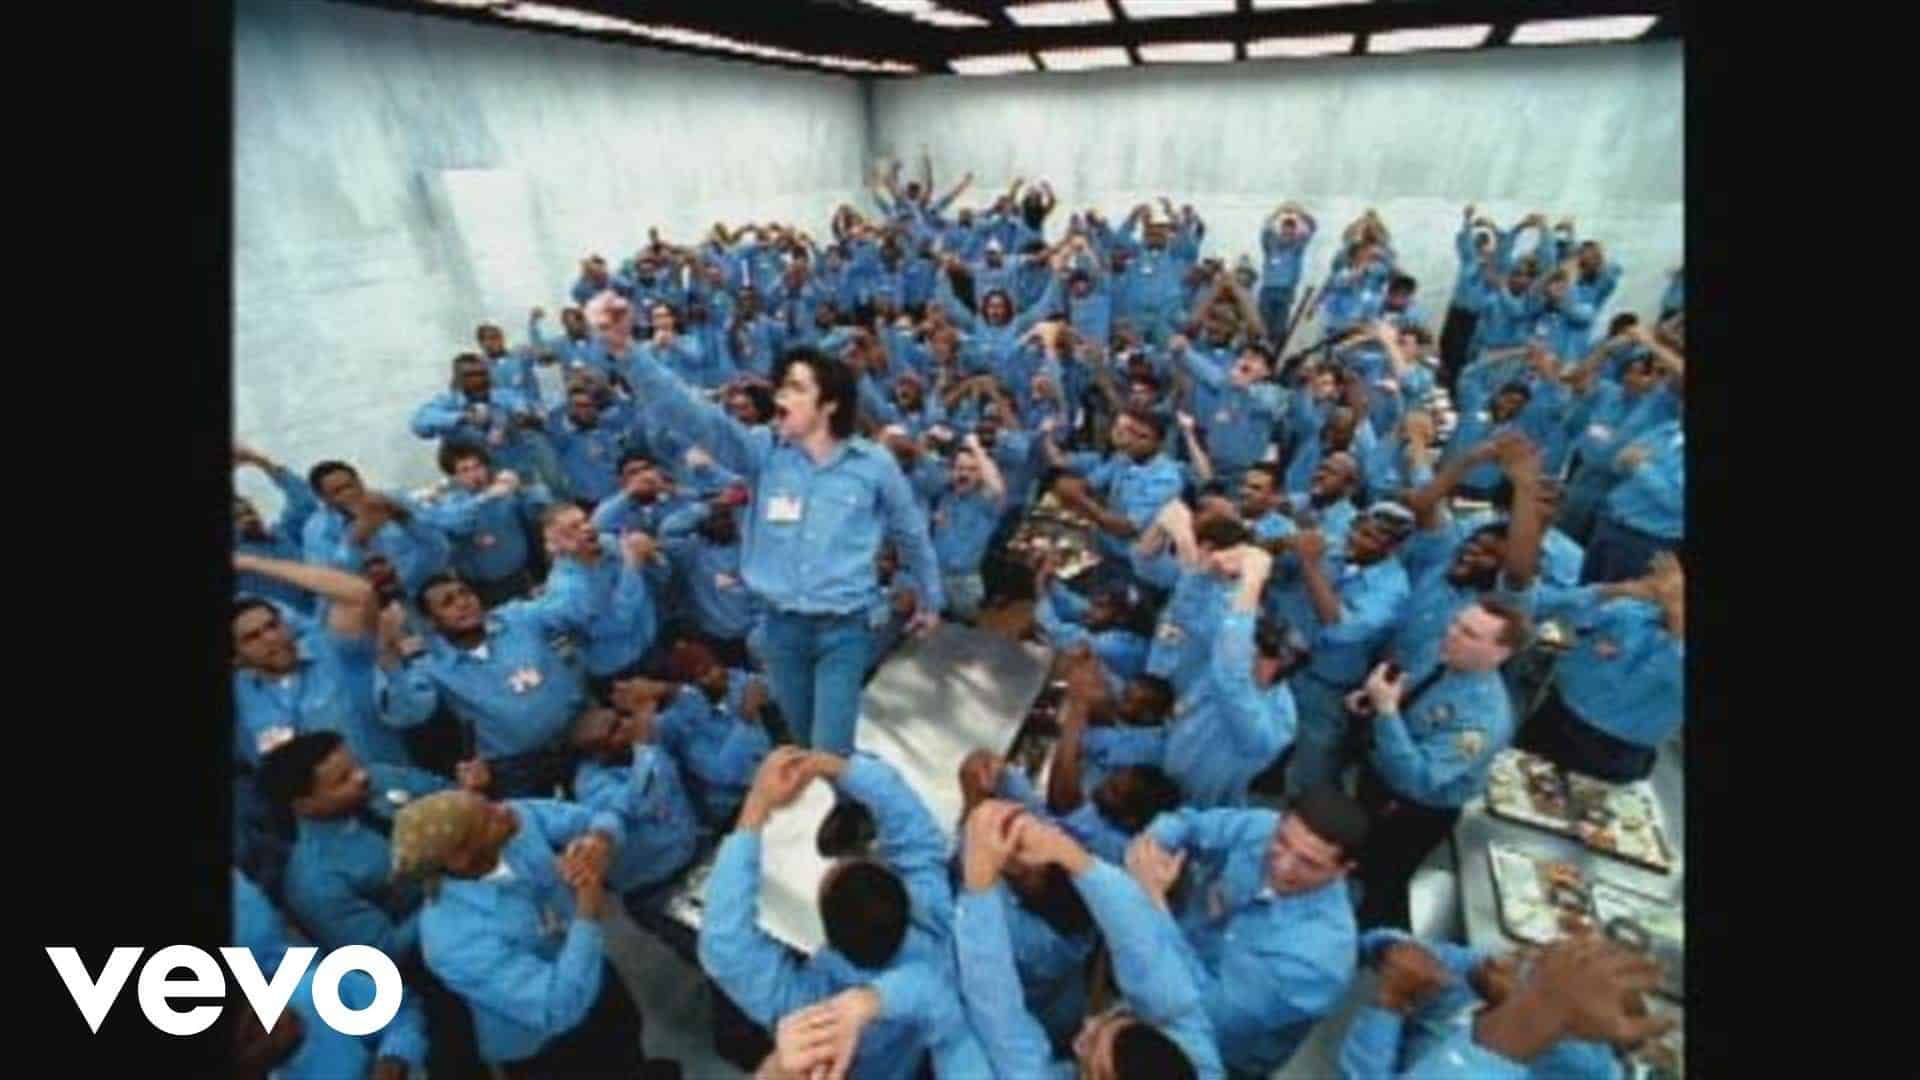 Michael Jackson - They Don't Care About Us (Prison Version) 1